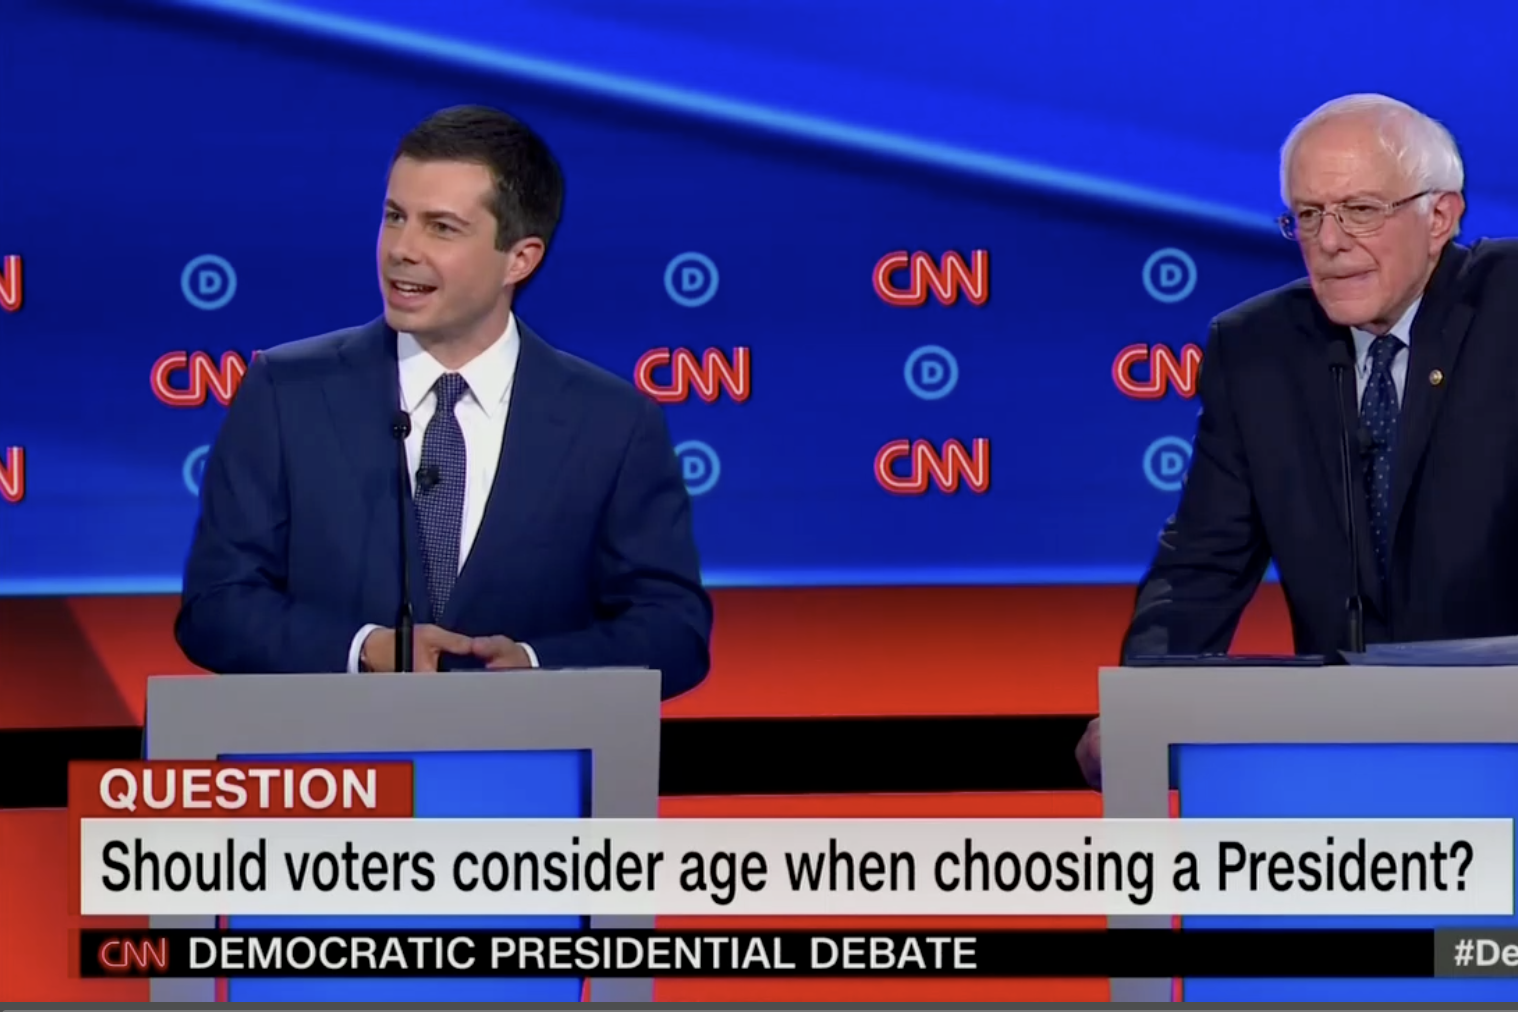 In this screengrab from CNN, Pete Buttigieg debates while Bernie Sanders makes a concentrating expression. The banner reads: "Should voters consider age when choosing a President?"